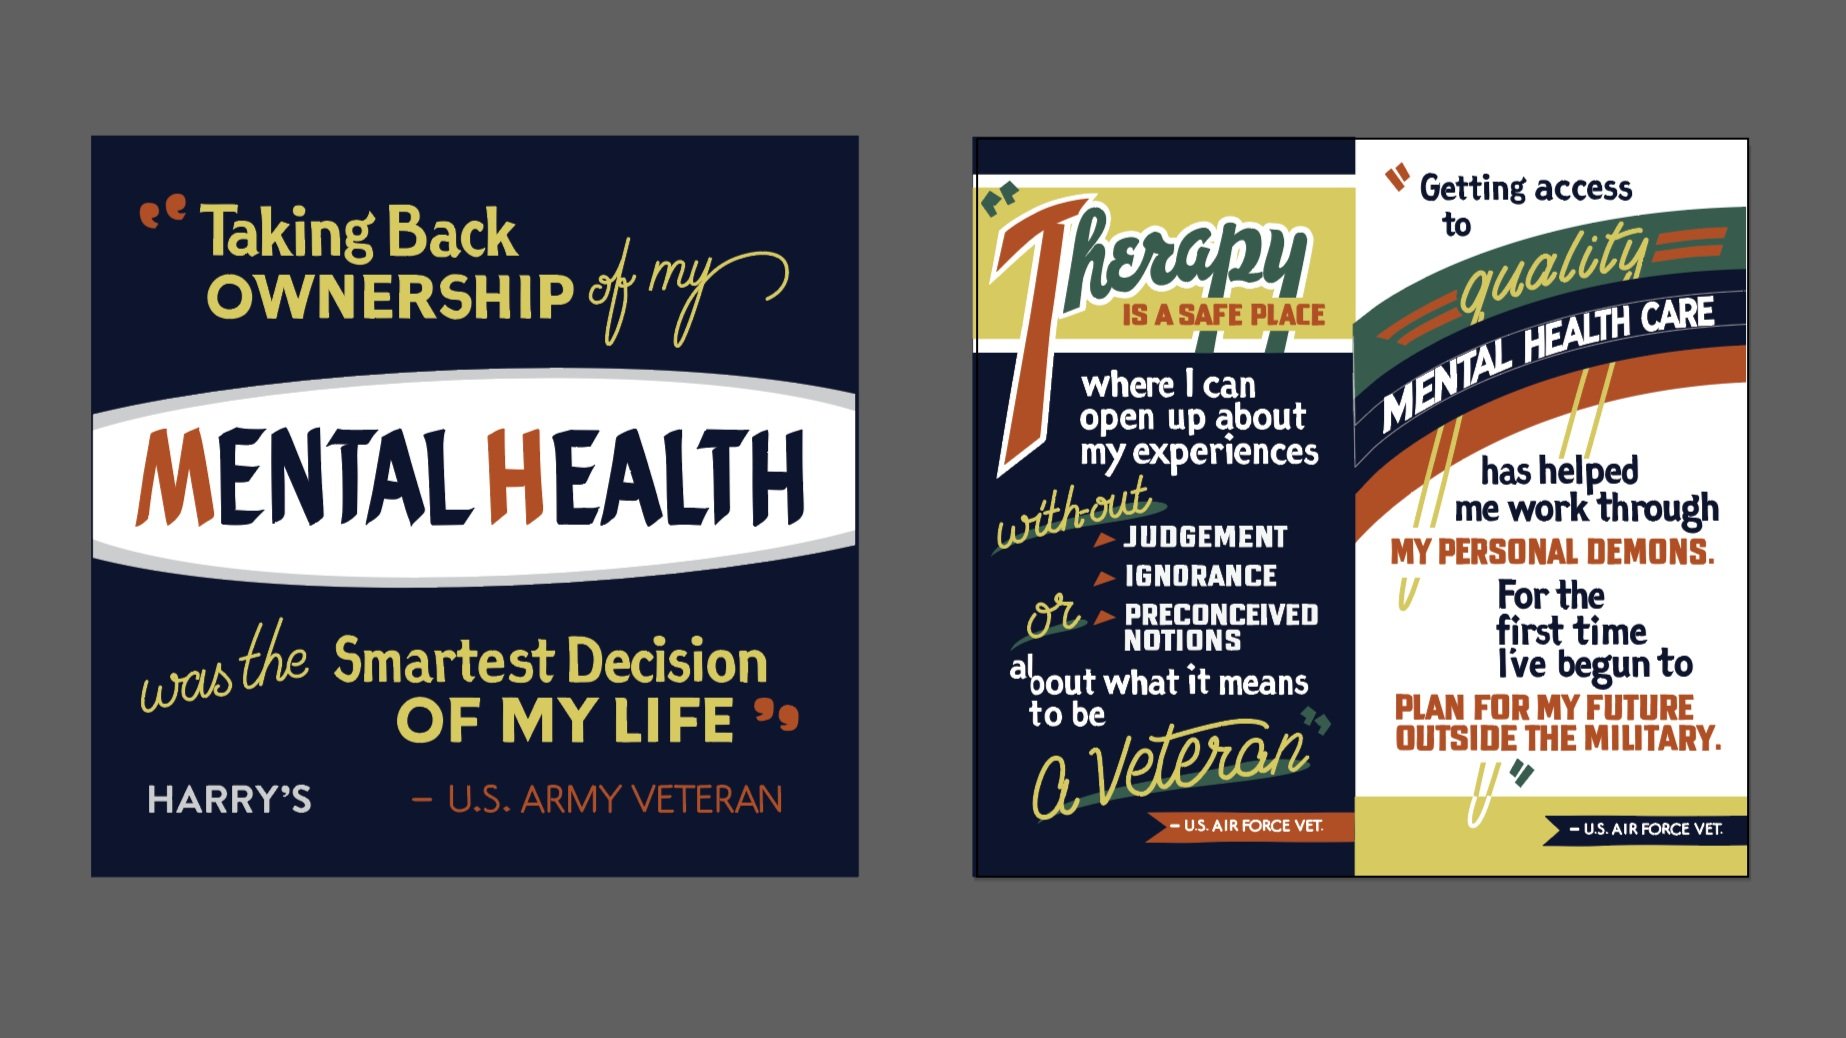  Design for a pamphlet for veterans mental health services, using custom lettering designed by hand and inspired by vintage rations and ammo box lettering, in muted blue, yellow, green, orange, and white 